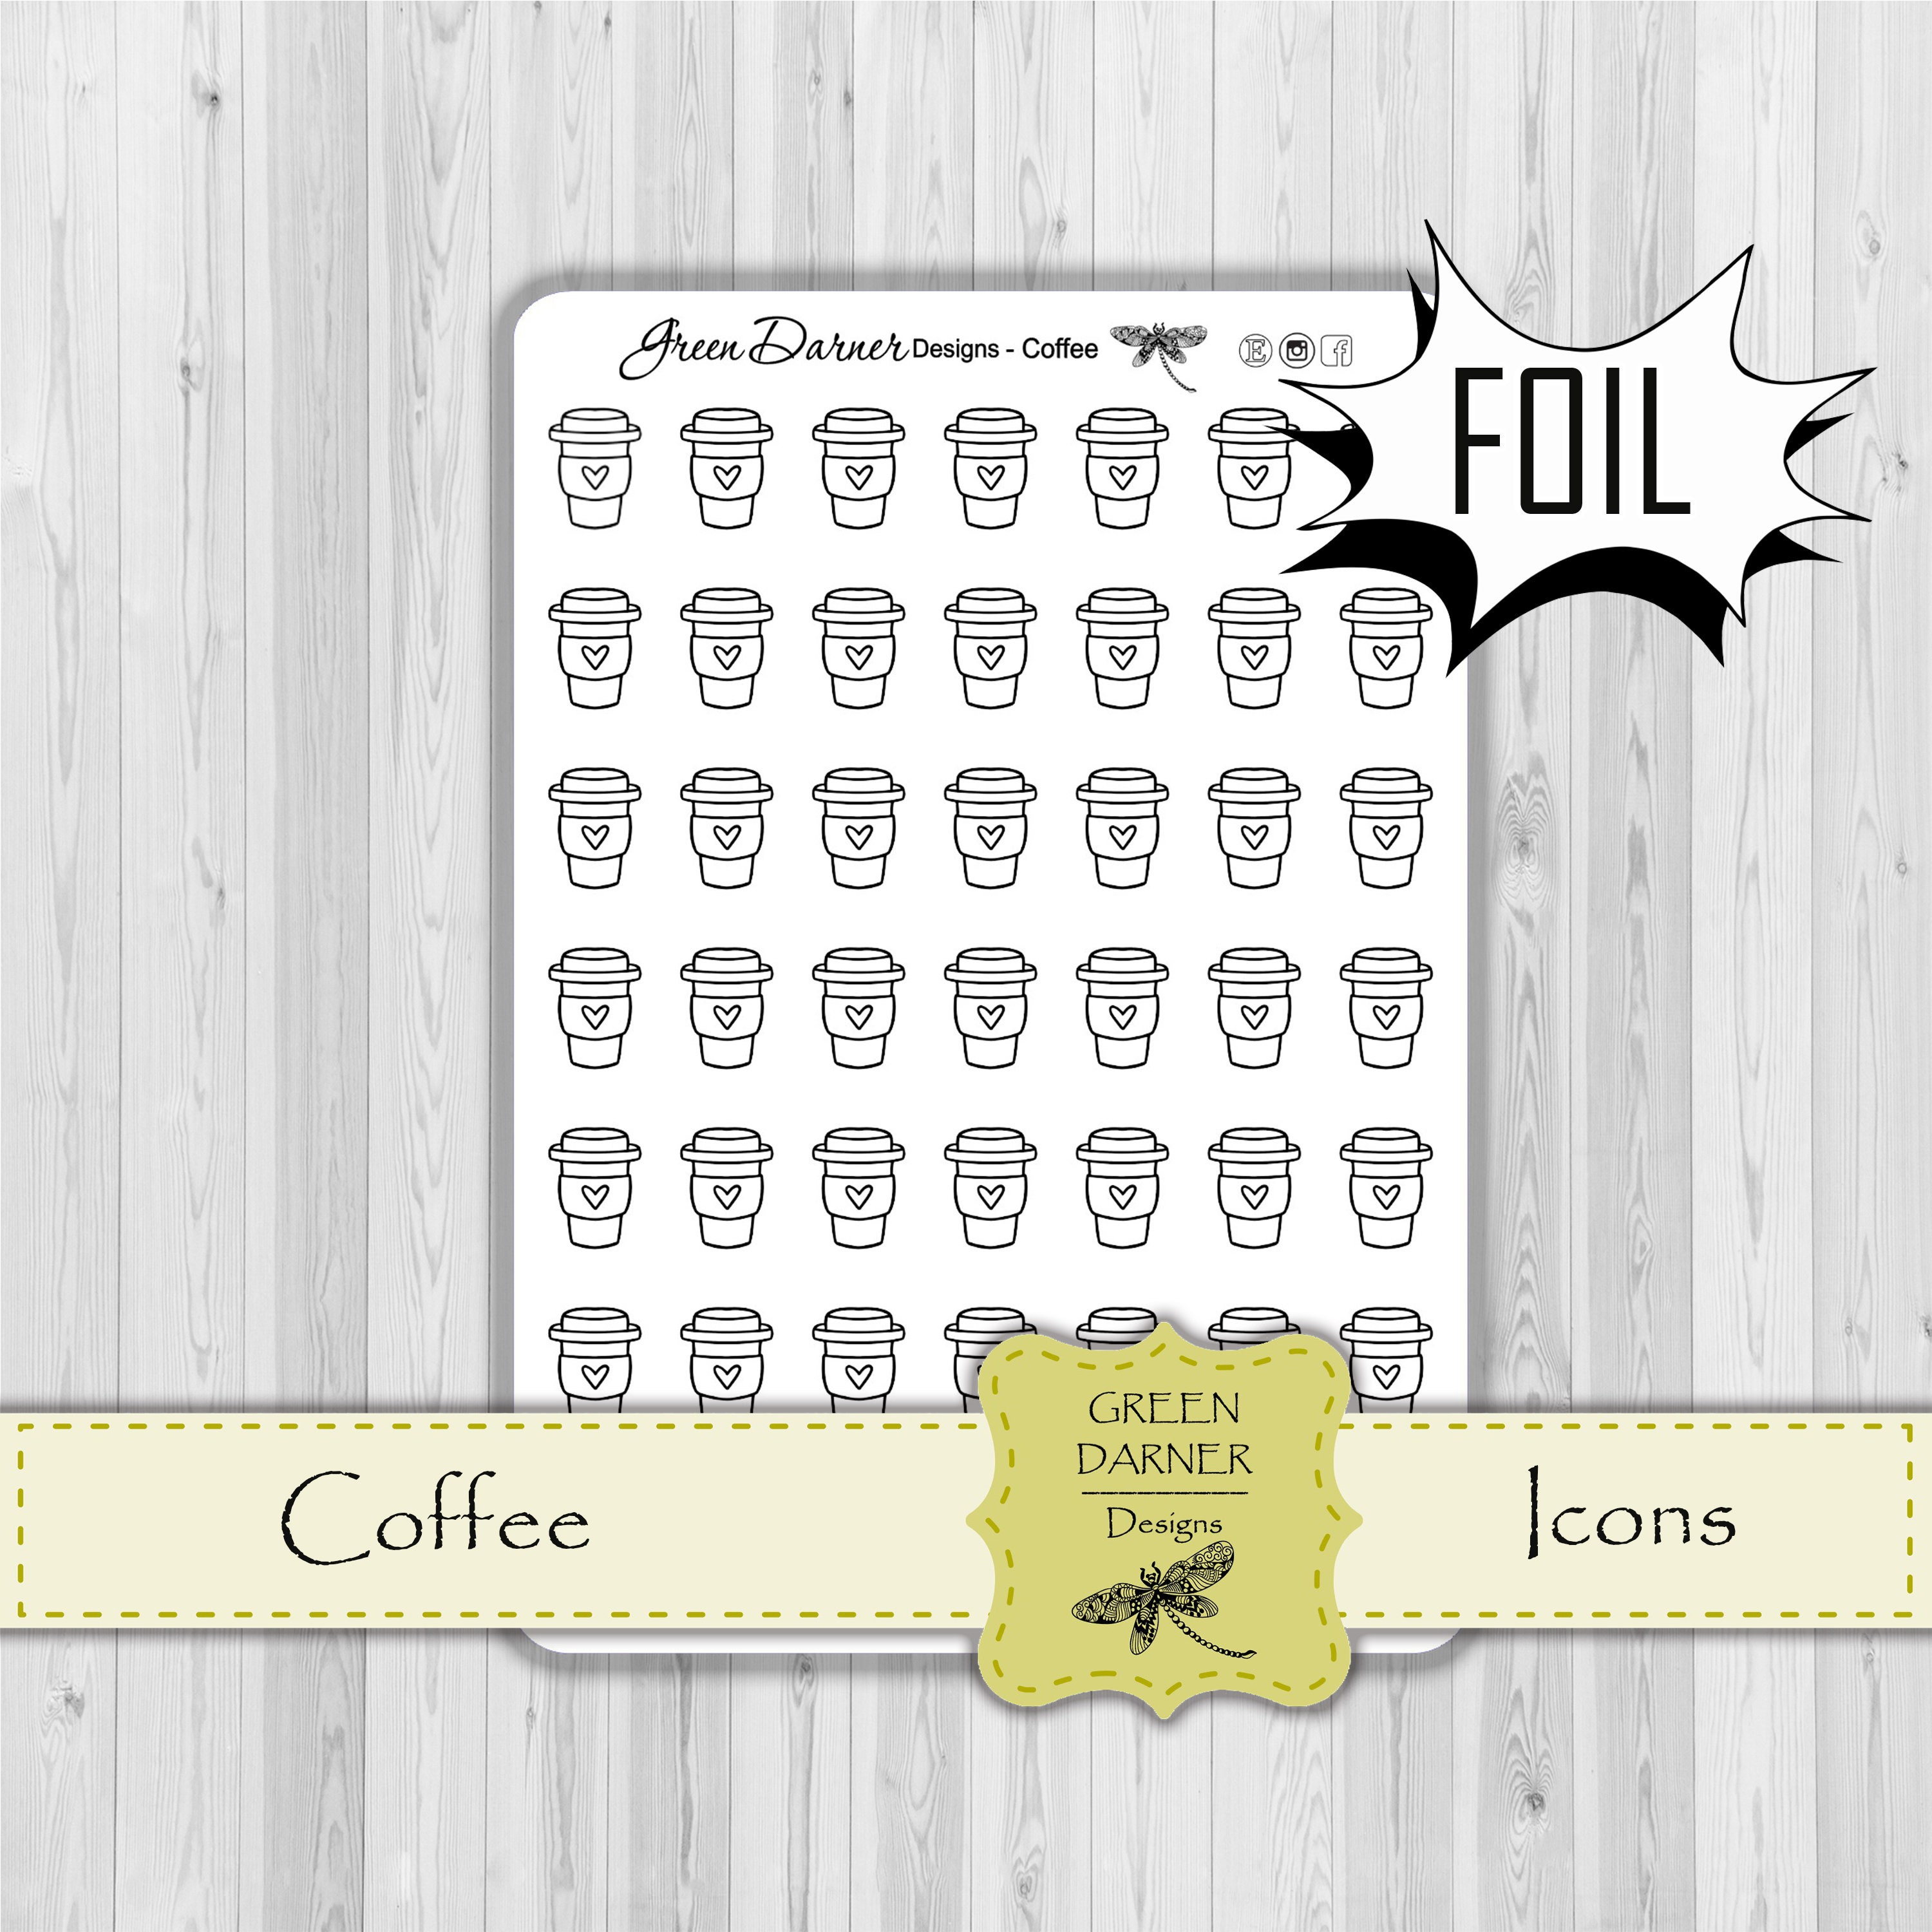 chores NAIL POLISH habit tracker functional spa FOIL icon planner stickers